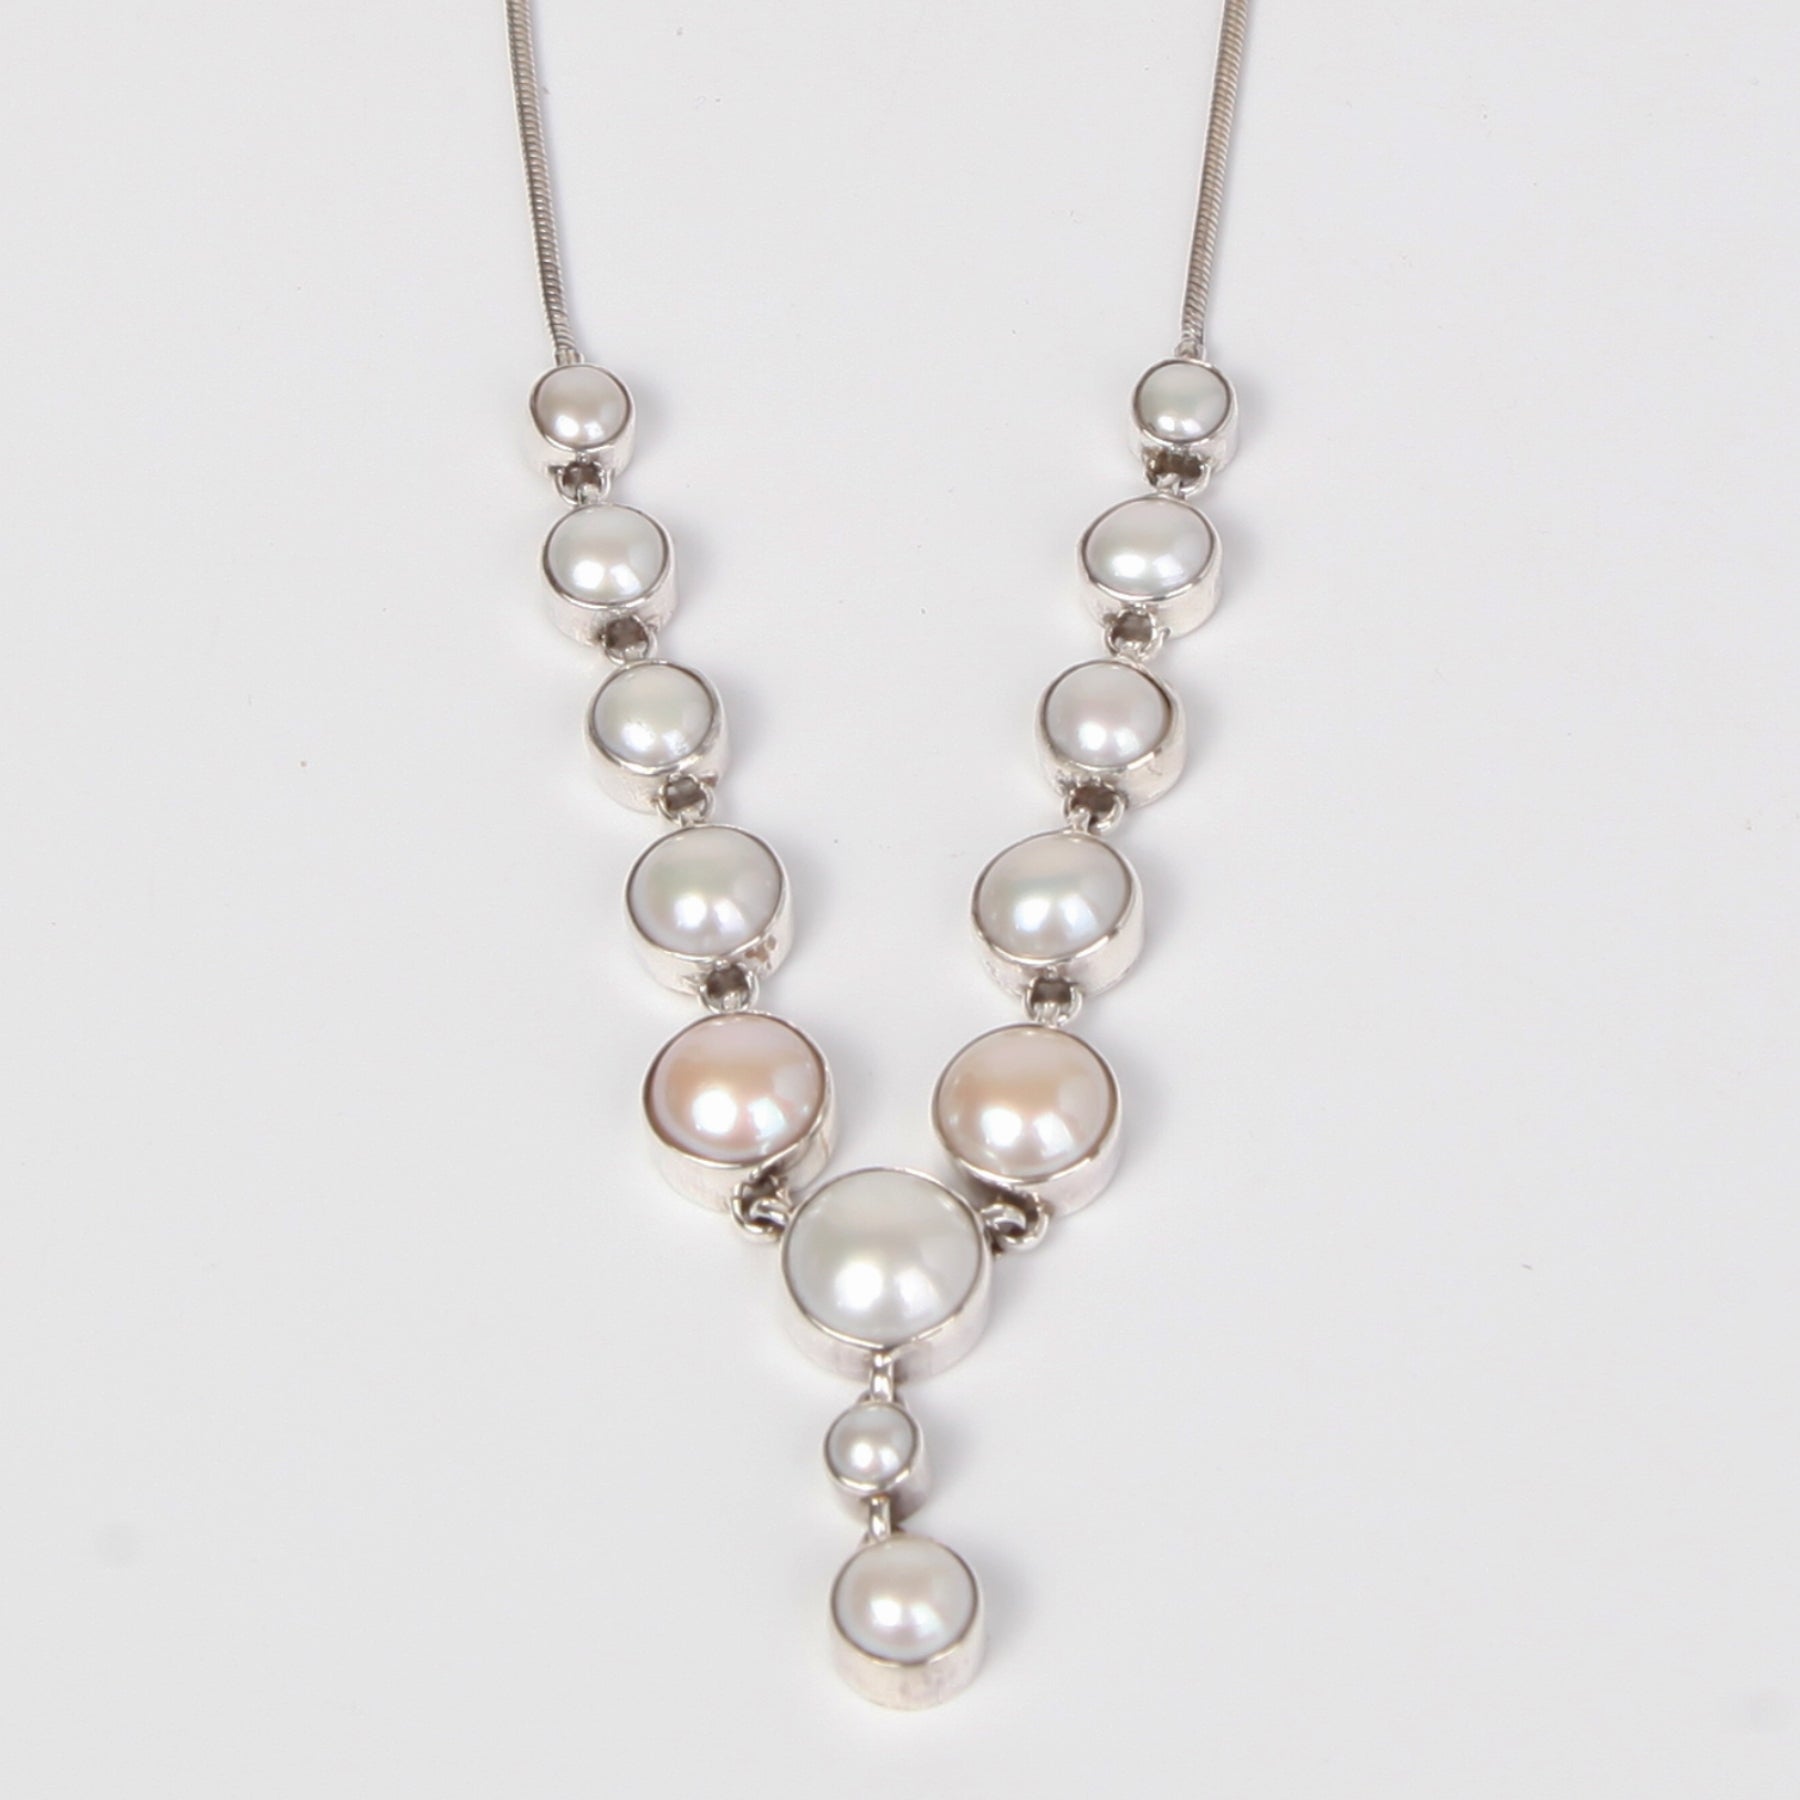 Light Drop Down Sterling silver Necklace with Fresh Water Pearls